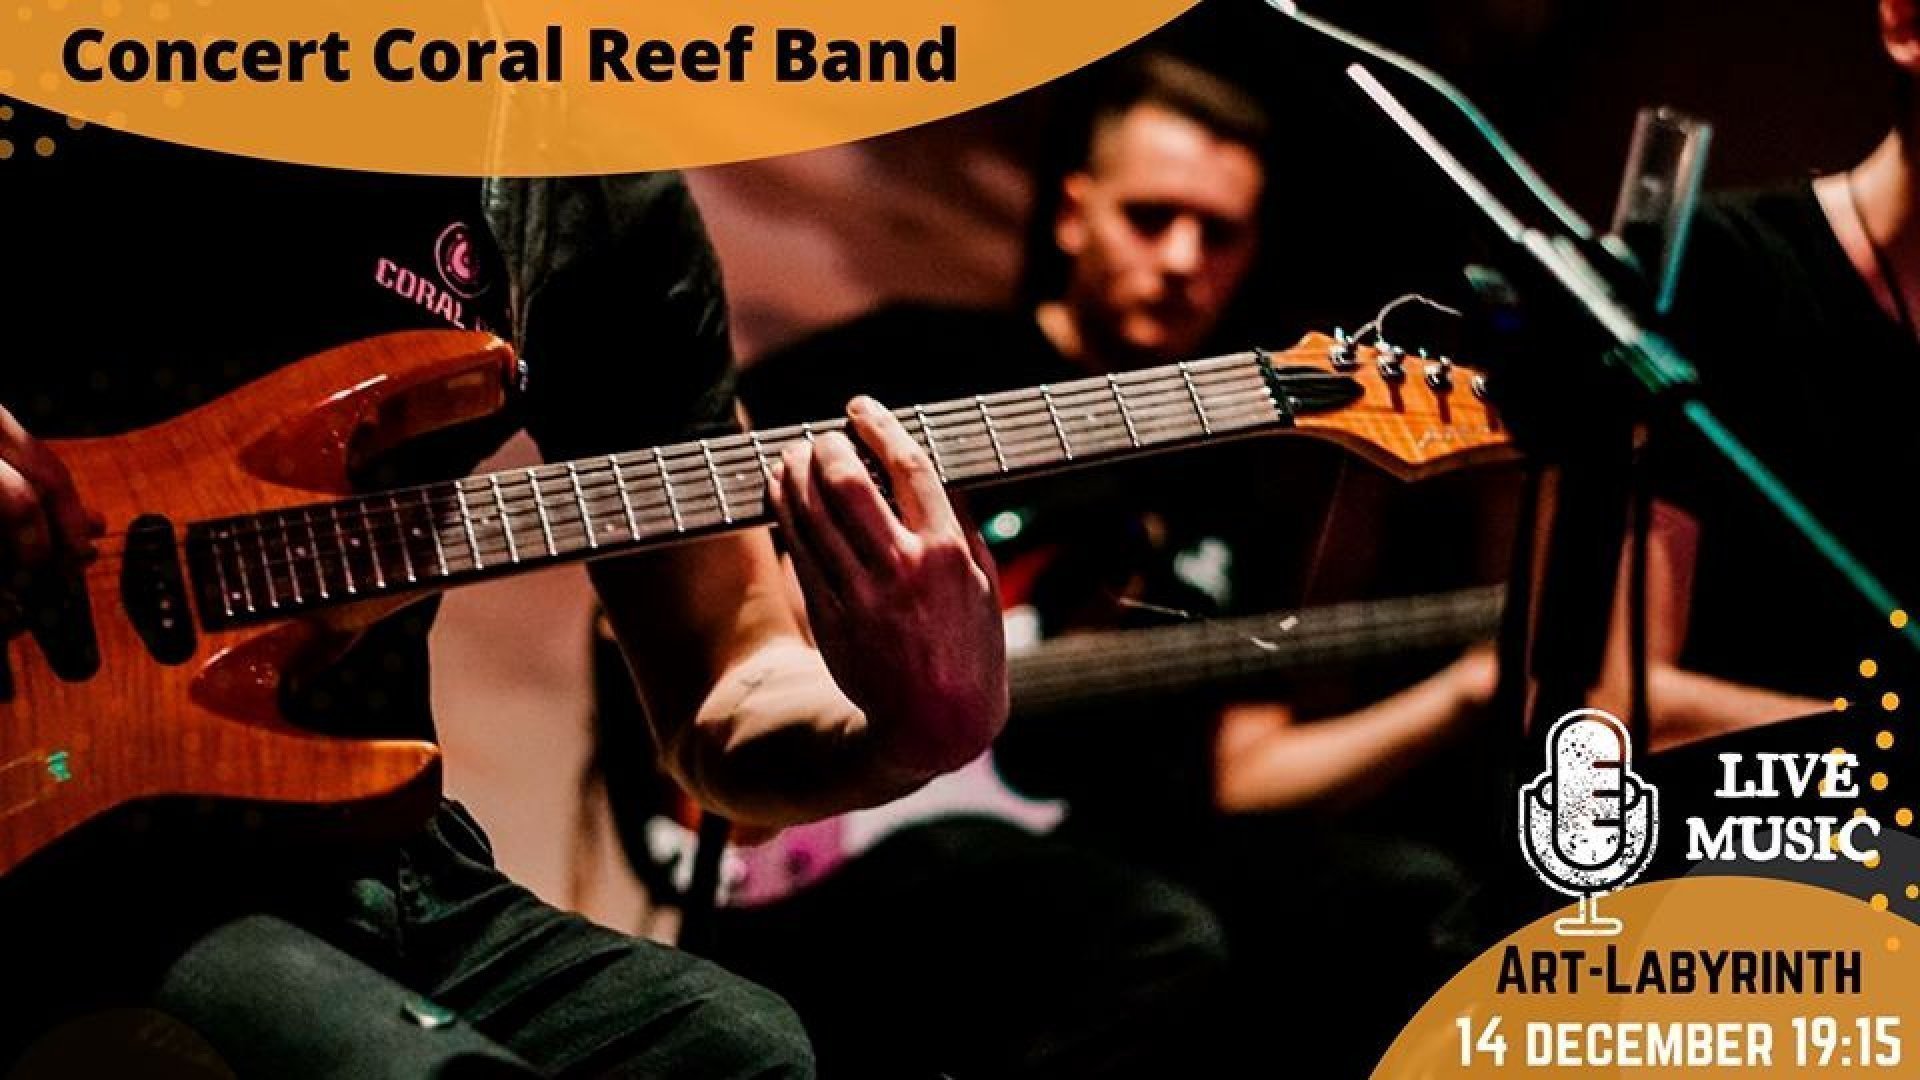 Concert Coral Reef Band